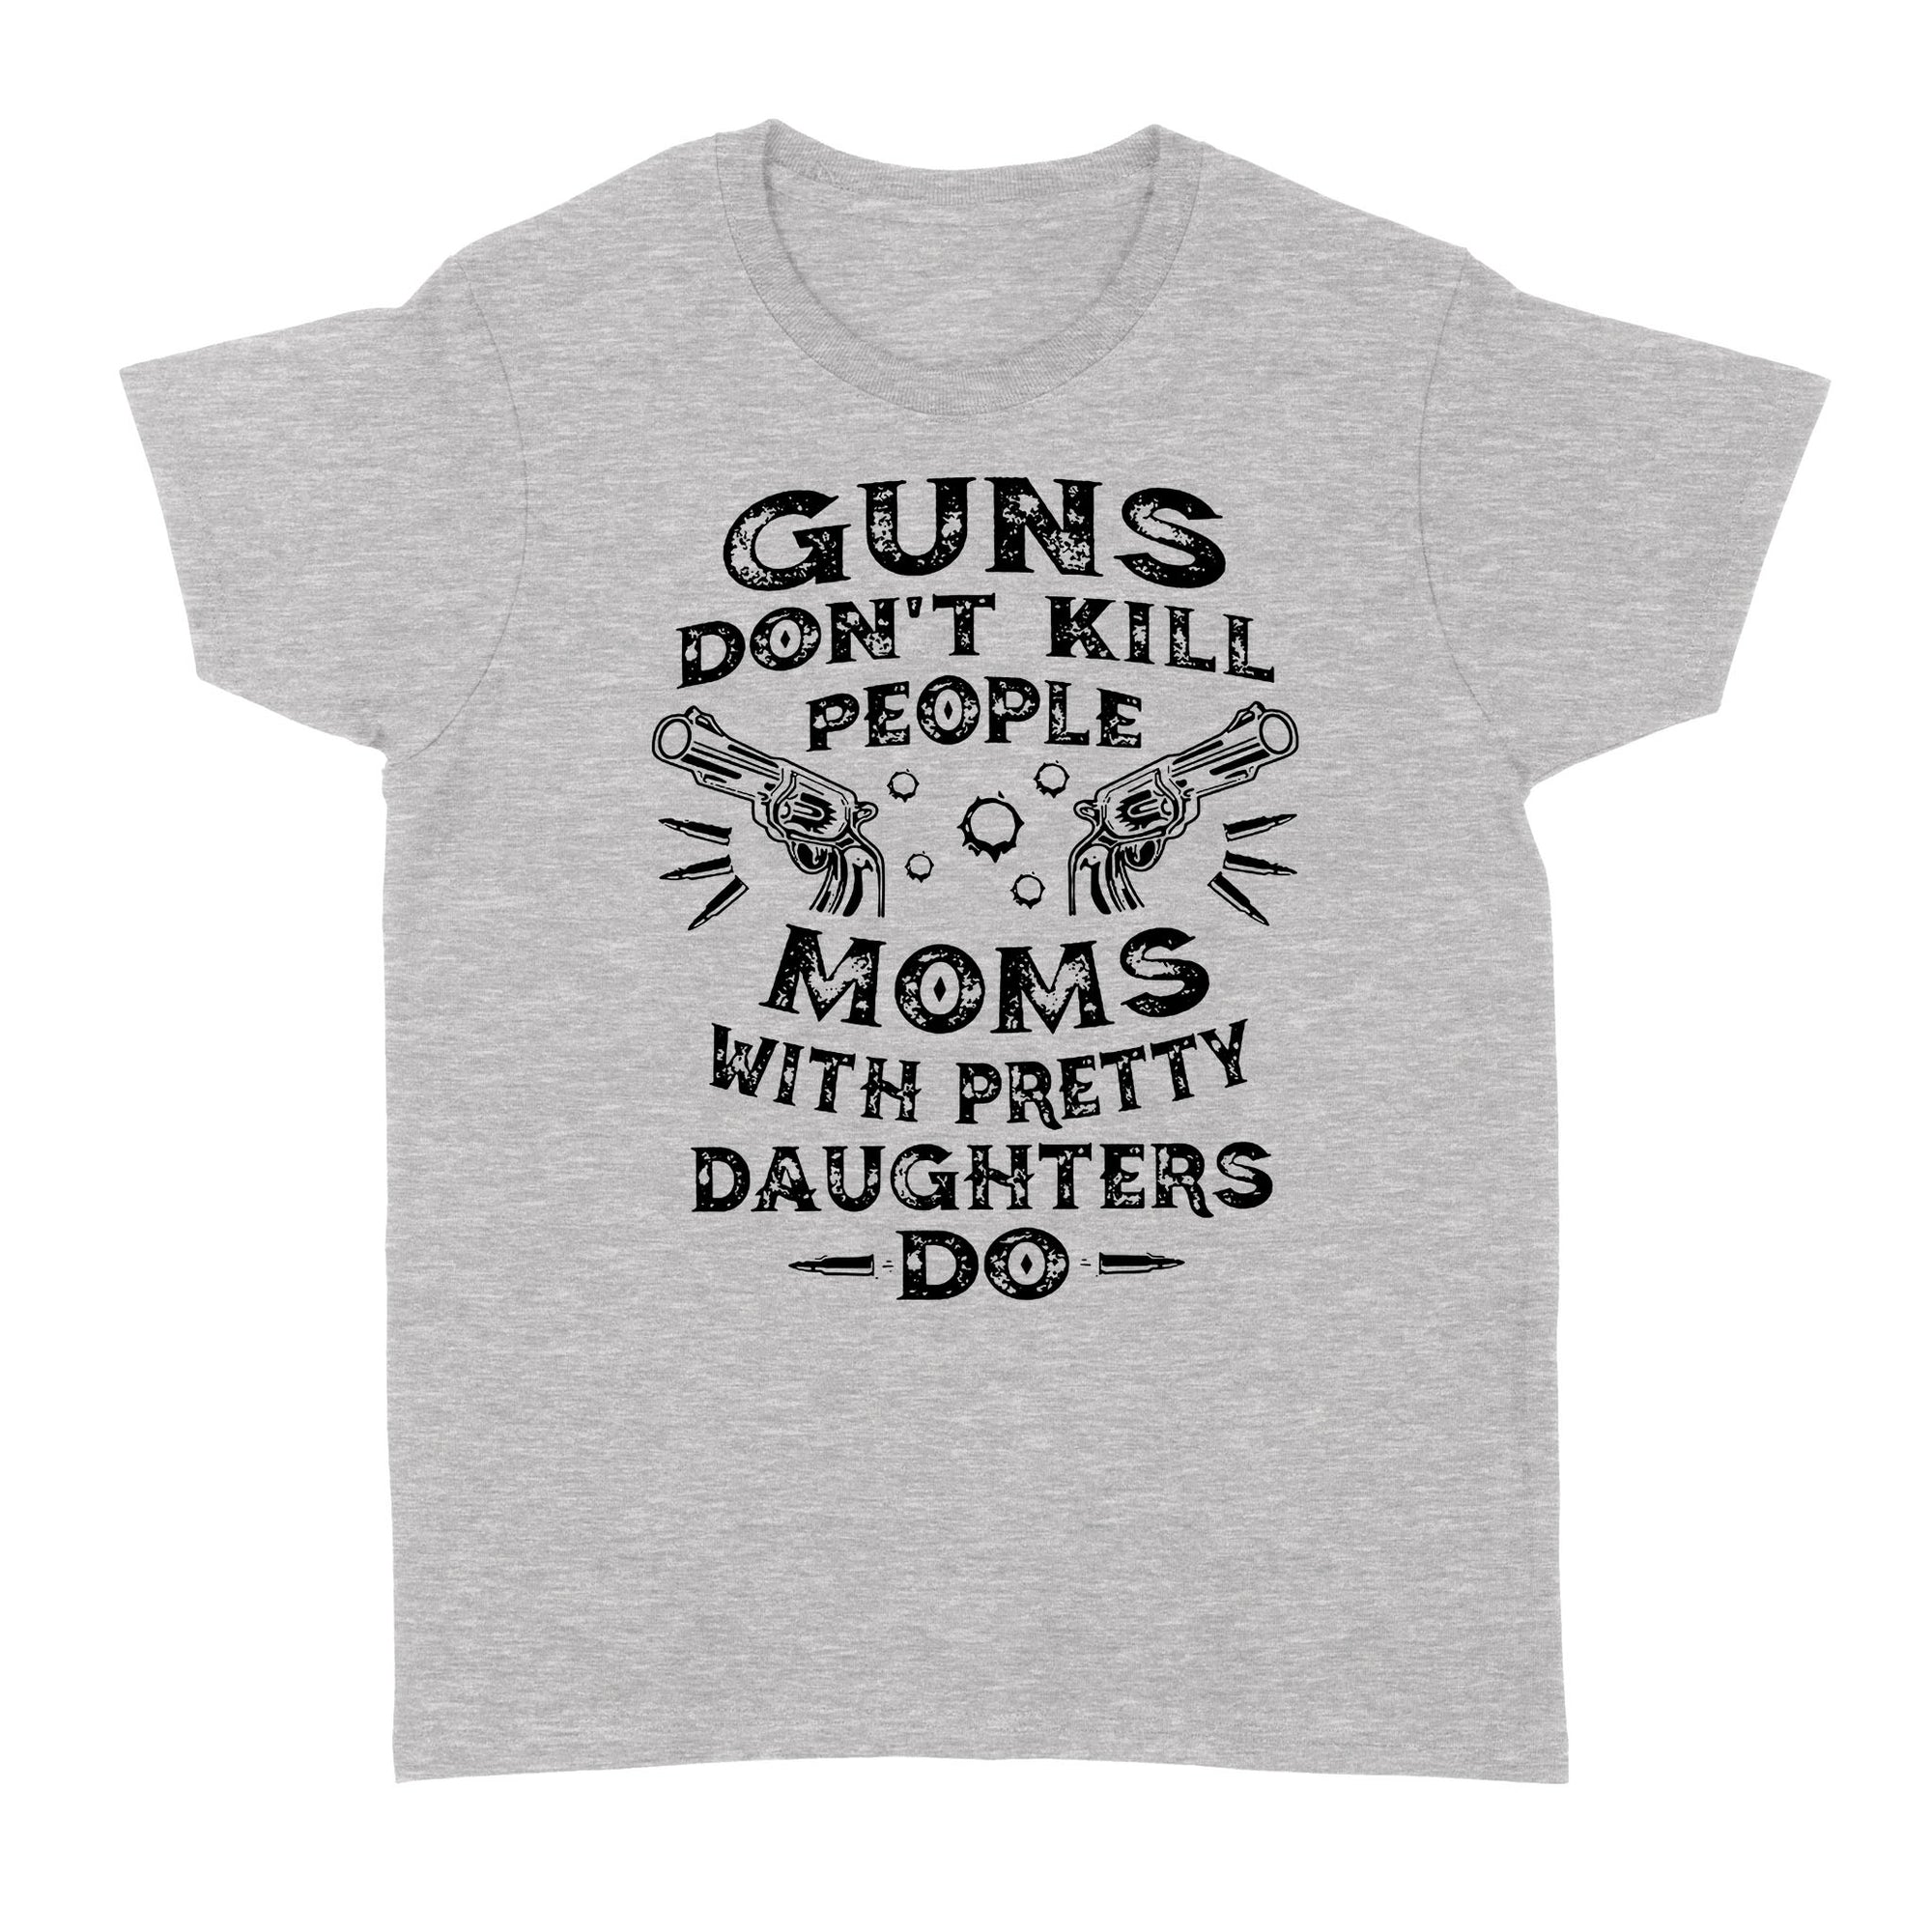 Guns Don t Kill People Moms With Pretty Daughters Do Funny Gift Ideas for Mom Mother Wife w - Standard Women's T-shirt